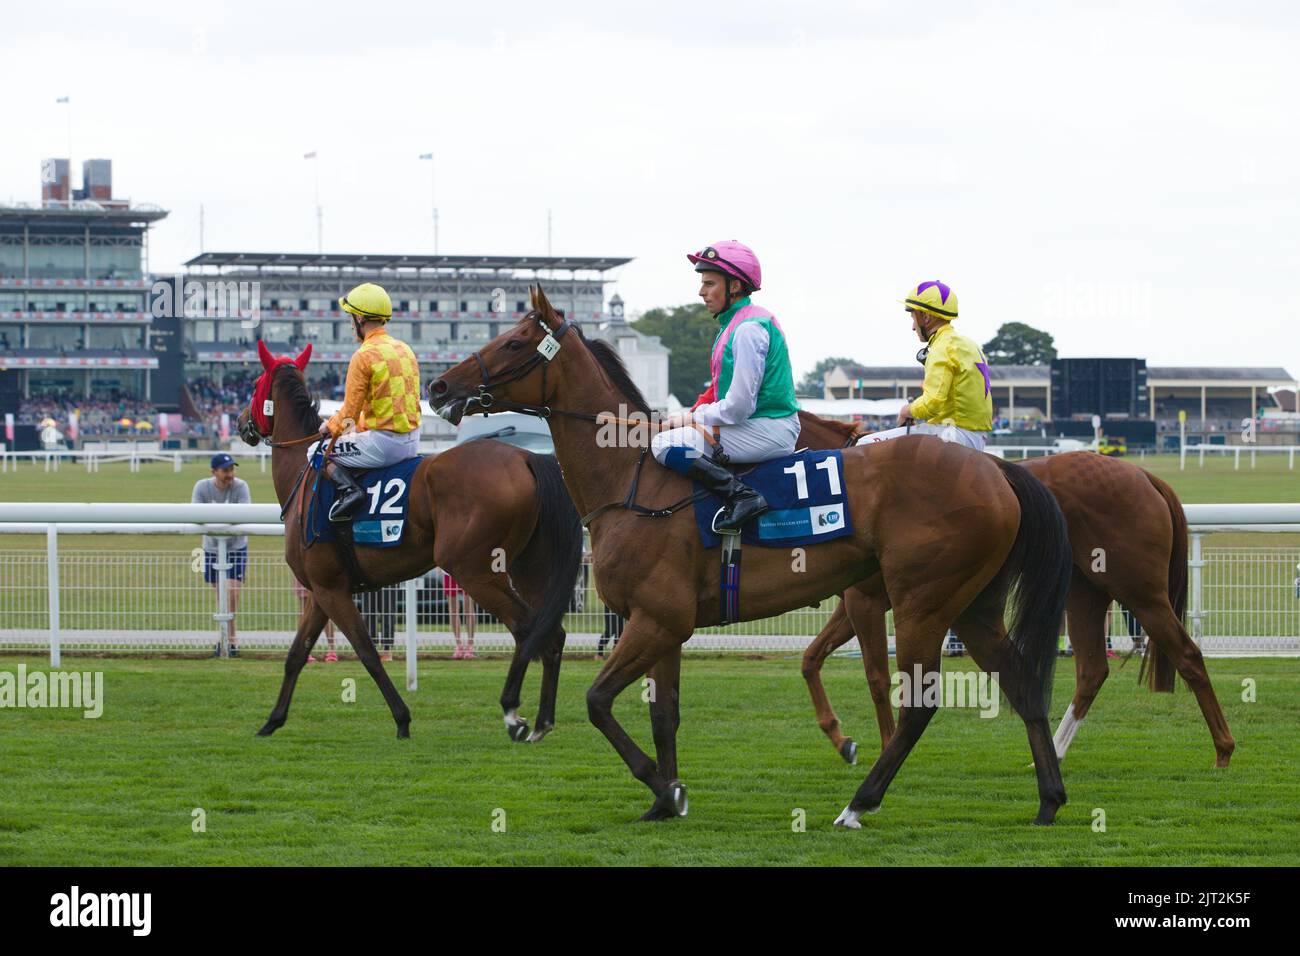 Left to right: Jockeys David Egan, William Buick and Tom marquand waiting before the start of a race at York Racecourse during the Ebor Festival. Stock Photo